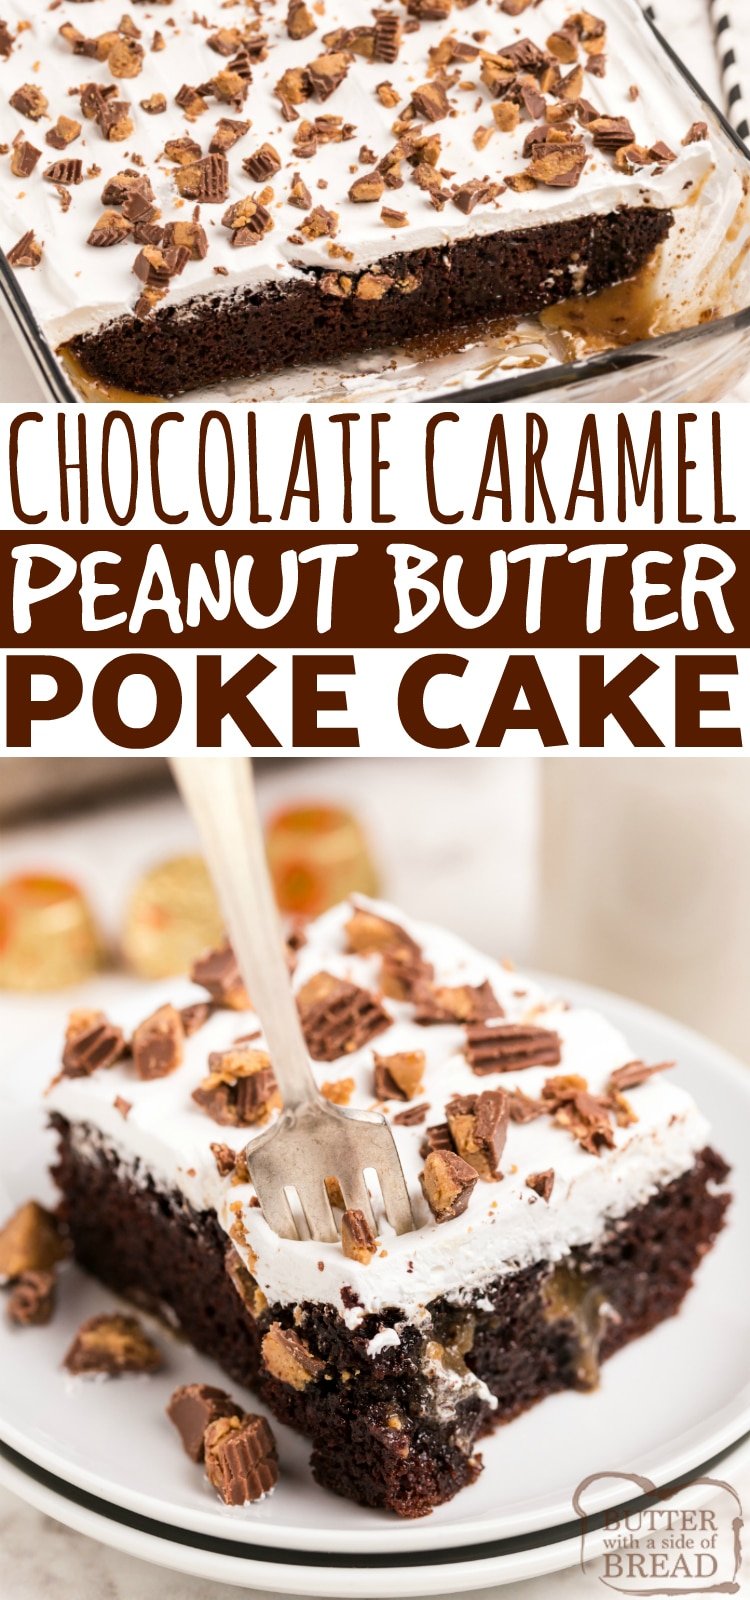 Chocolate Caramel Peanut Butter Poke Cake made with a cake mix, chopped Reese's peanut butter cups and a delicious homemade peanut butter caramel sauce. Decadent but easy chocolate cake recipe! 